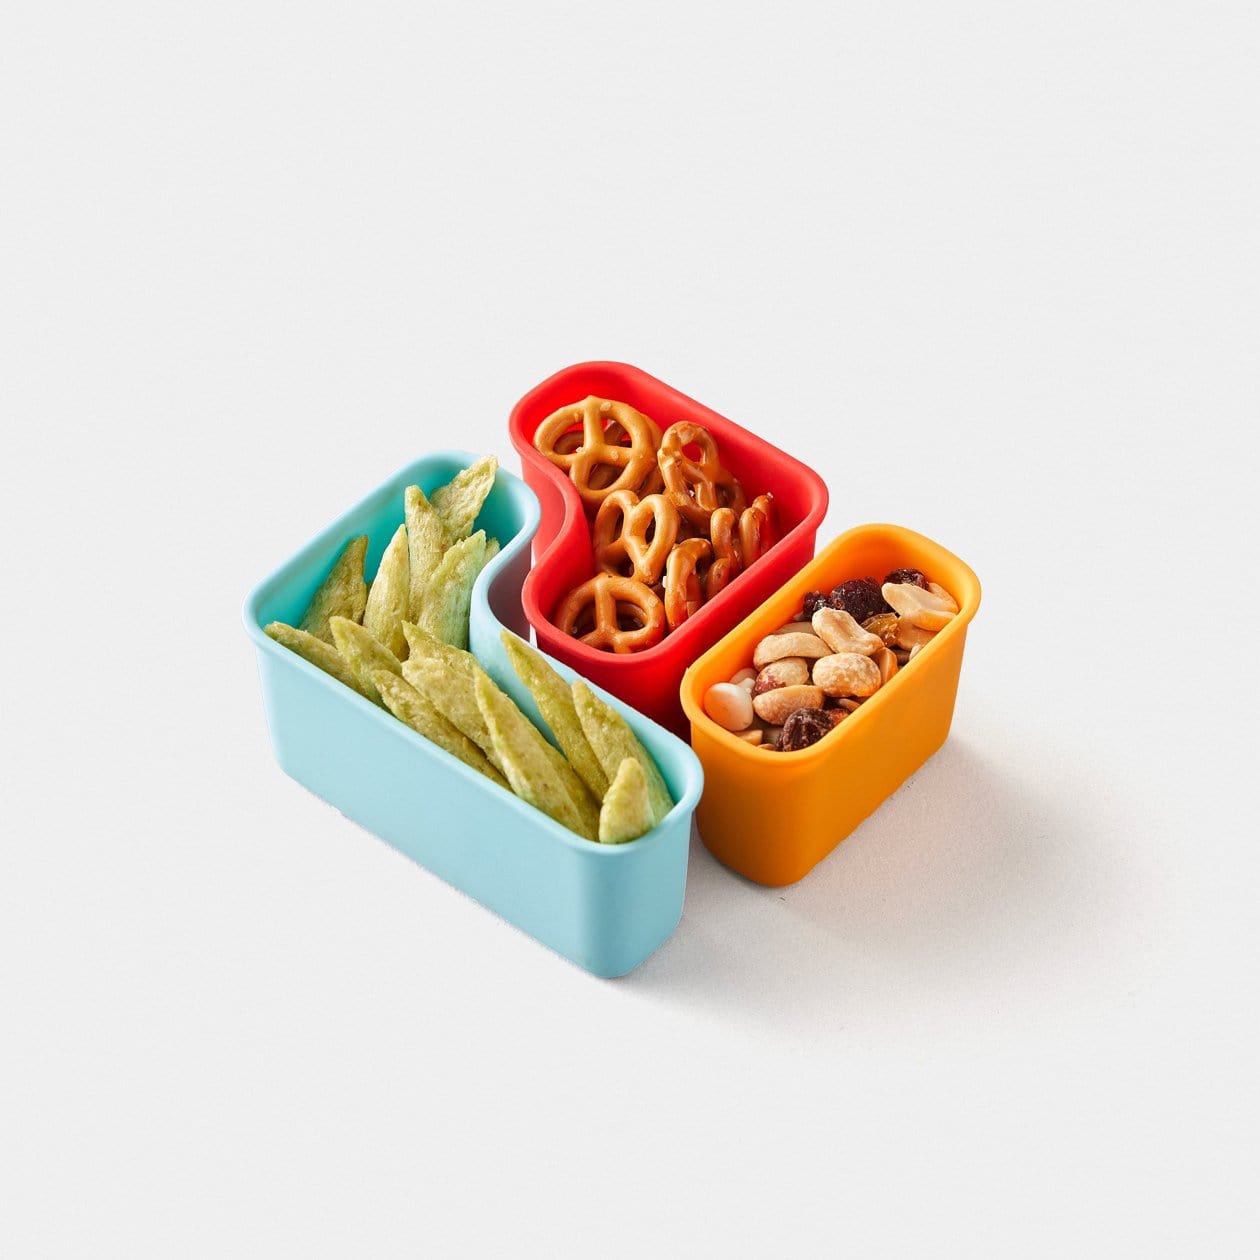 Our Favorite Lunch Box: PlanetBox Launch Review - Buggy and Buddy